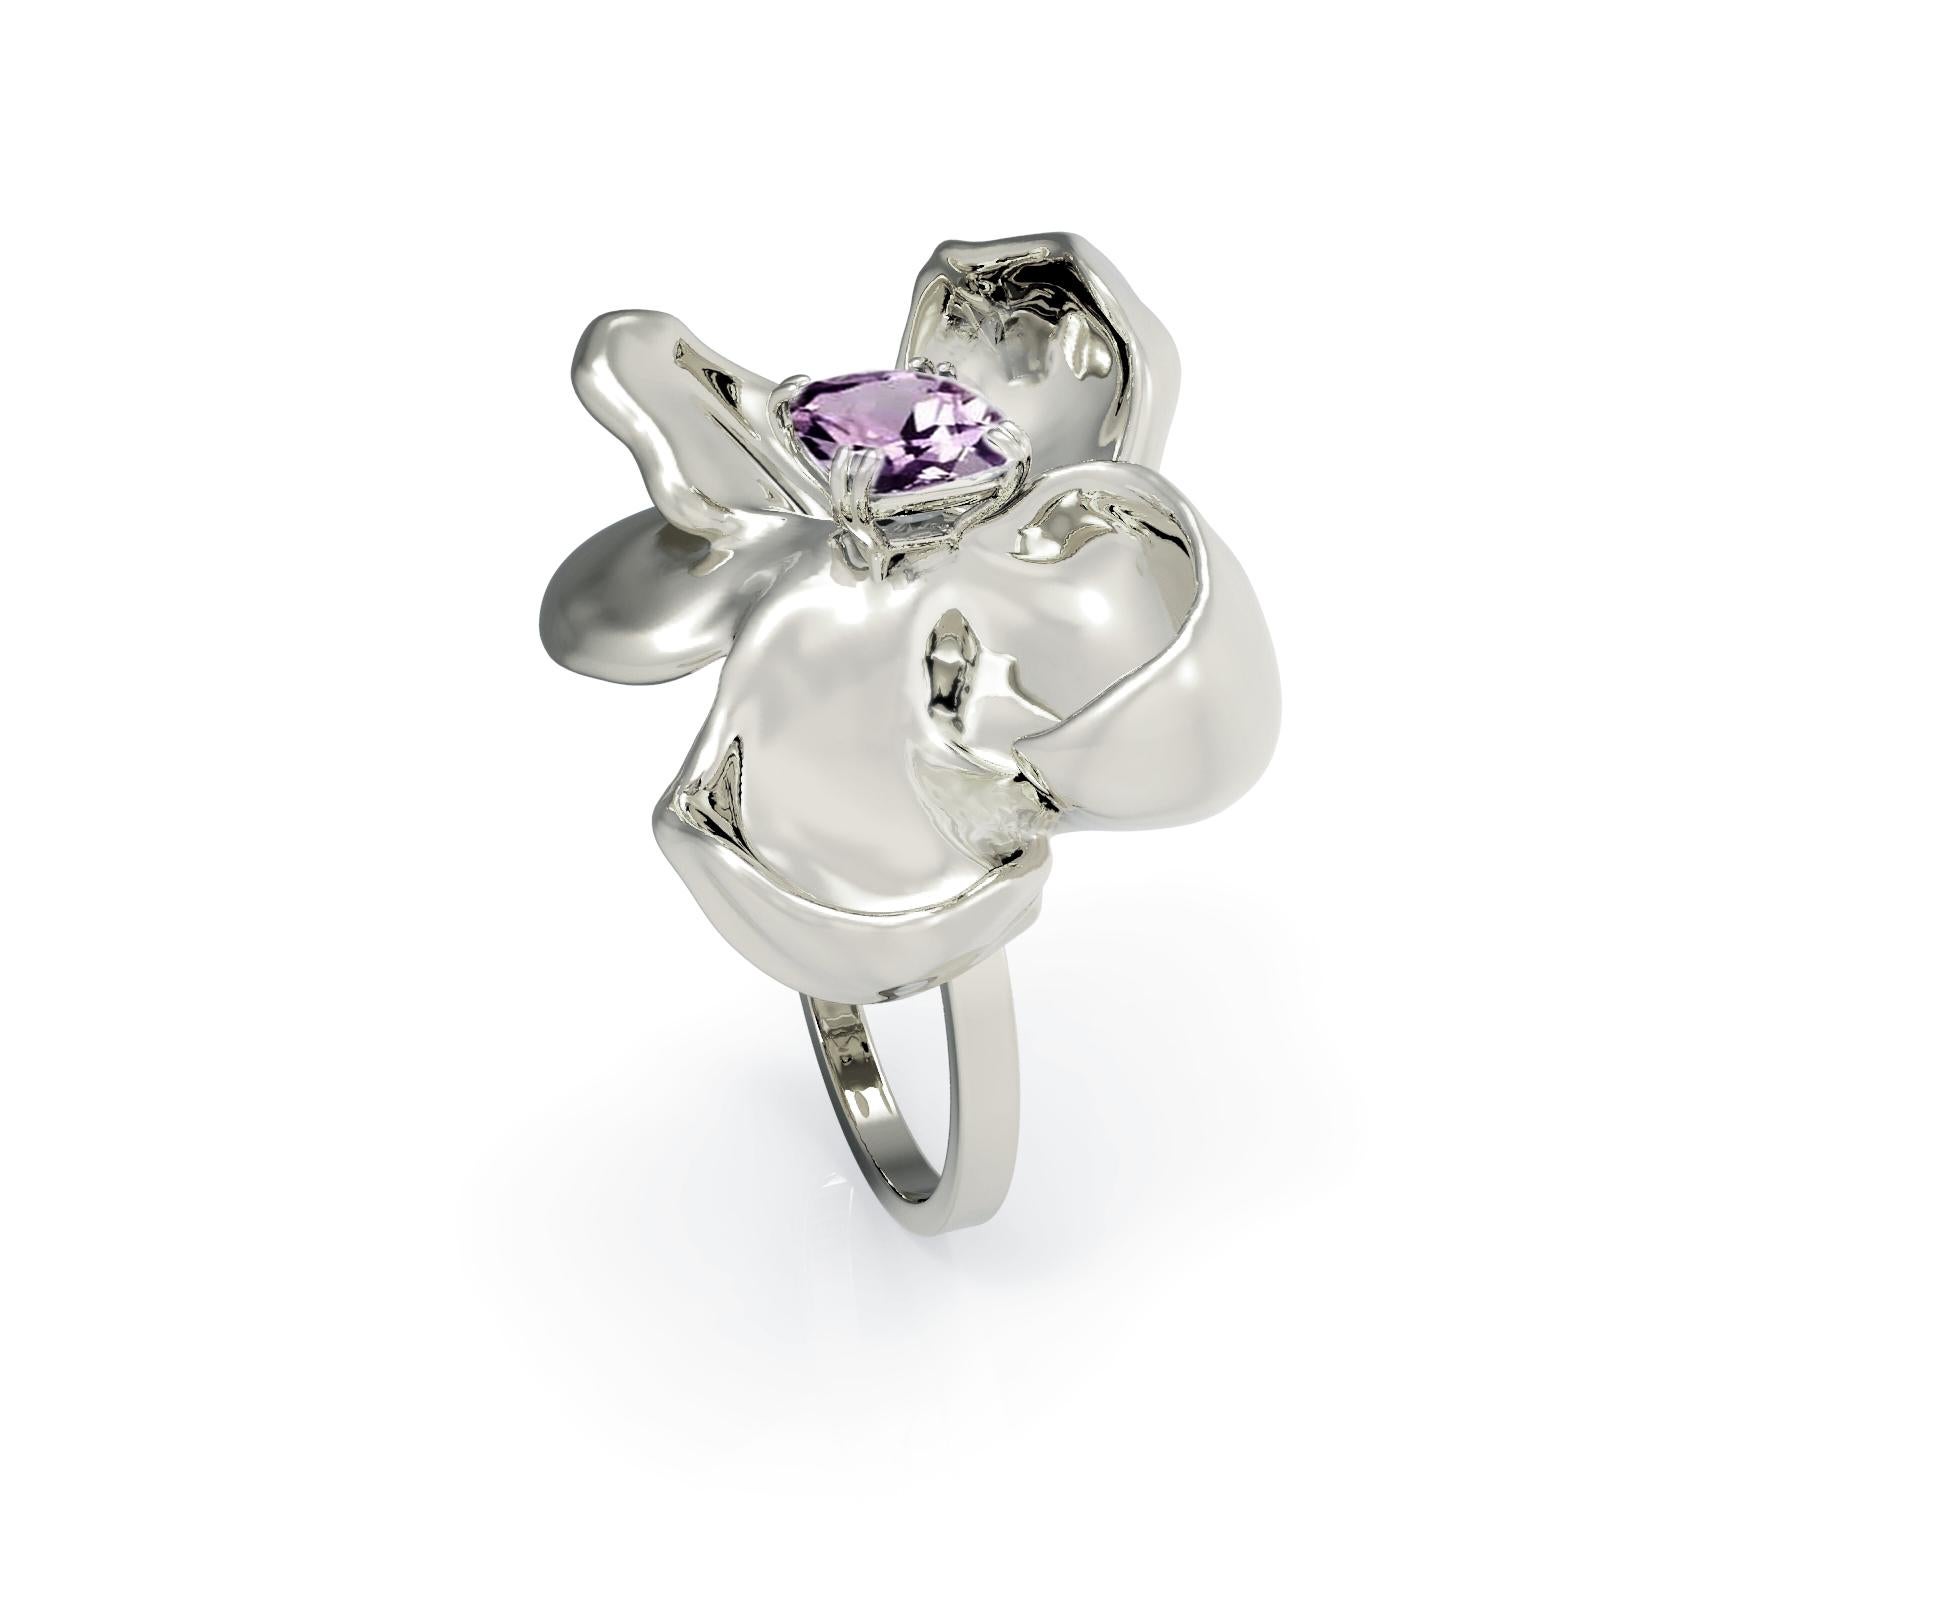 18 Karat White Gold Contemporary Cocktail Ring with Berry Spinel by Artist For Sale 2